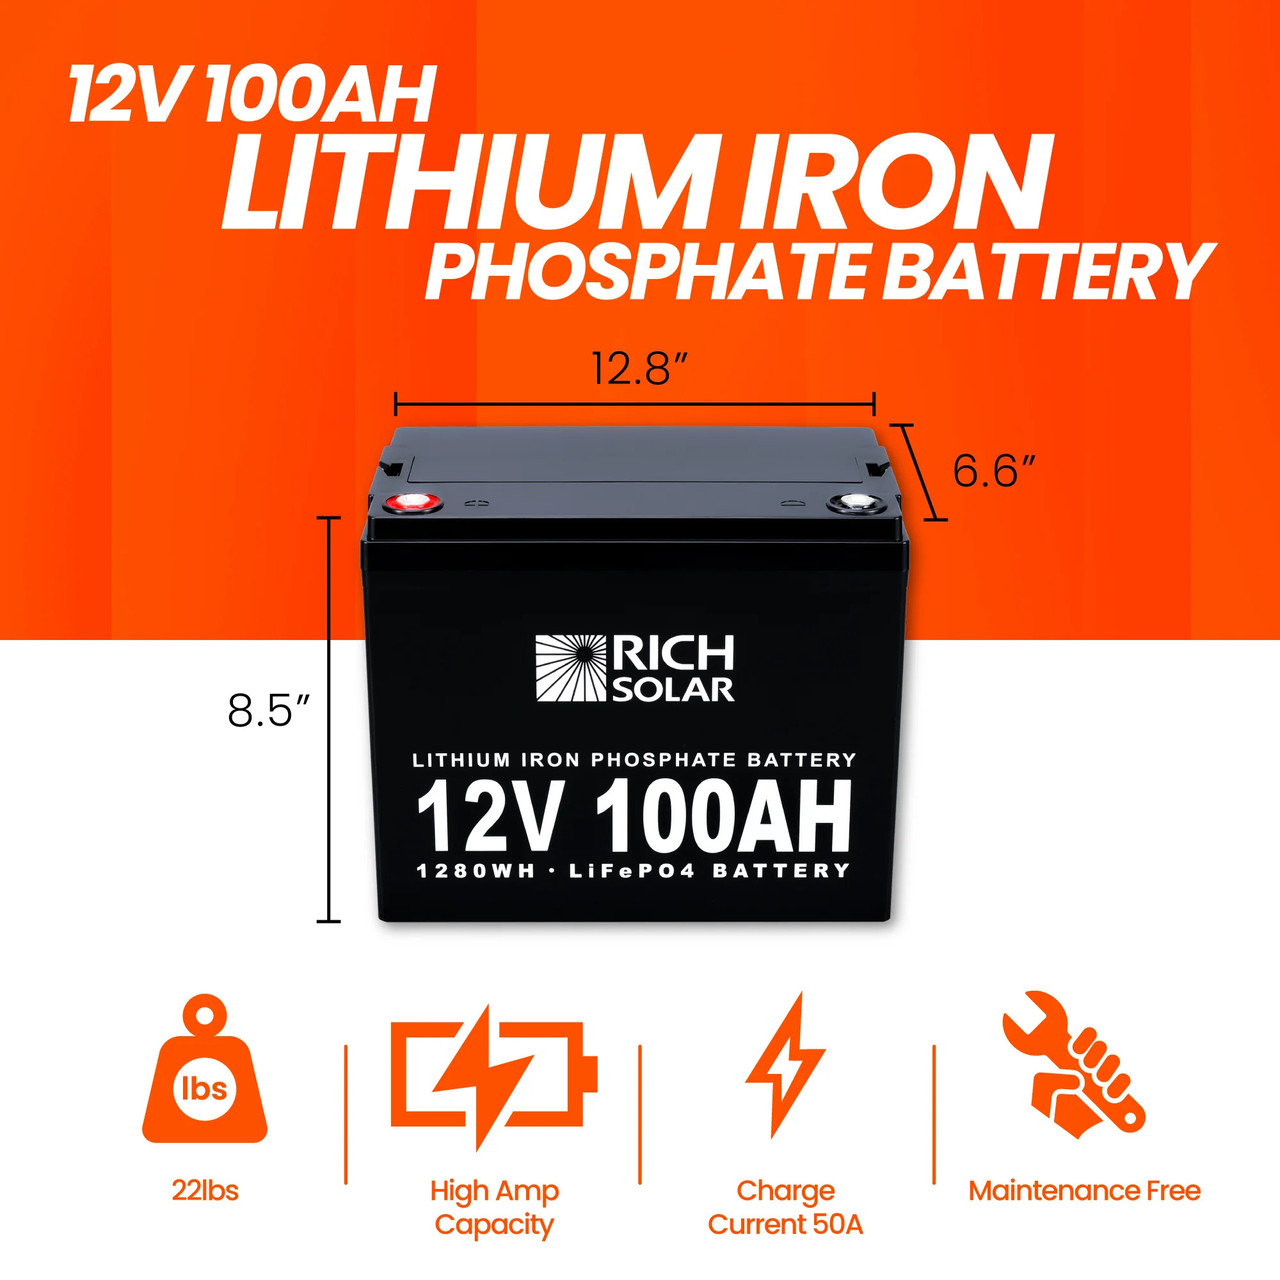 https://cdn11.bigcommerce.com/s-kwuh809851/images/stencil/1280x1280/products/3312/32154/12v-100ah-lithium-iron-phosphate-battery_2000x2000__92081.1677599777.jpg?c=2&imbypass=on